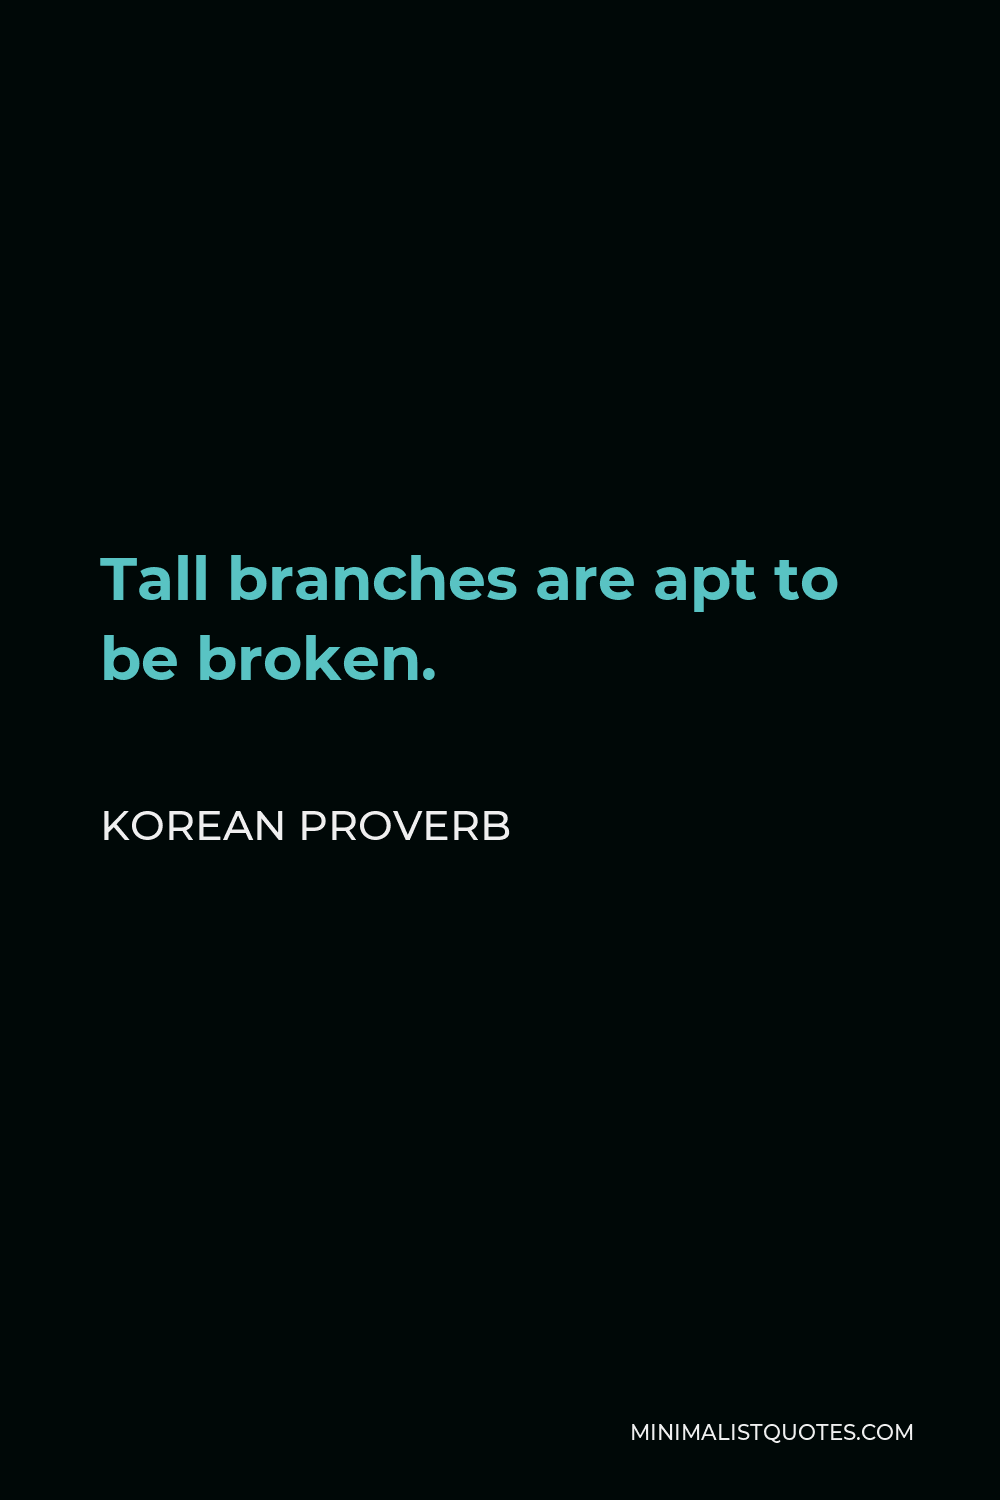 Korean Proverb Quote - Tall branches are apt to be broken.